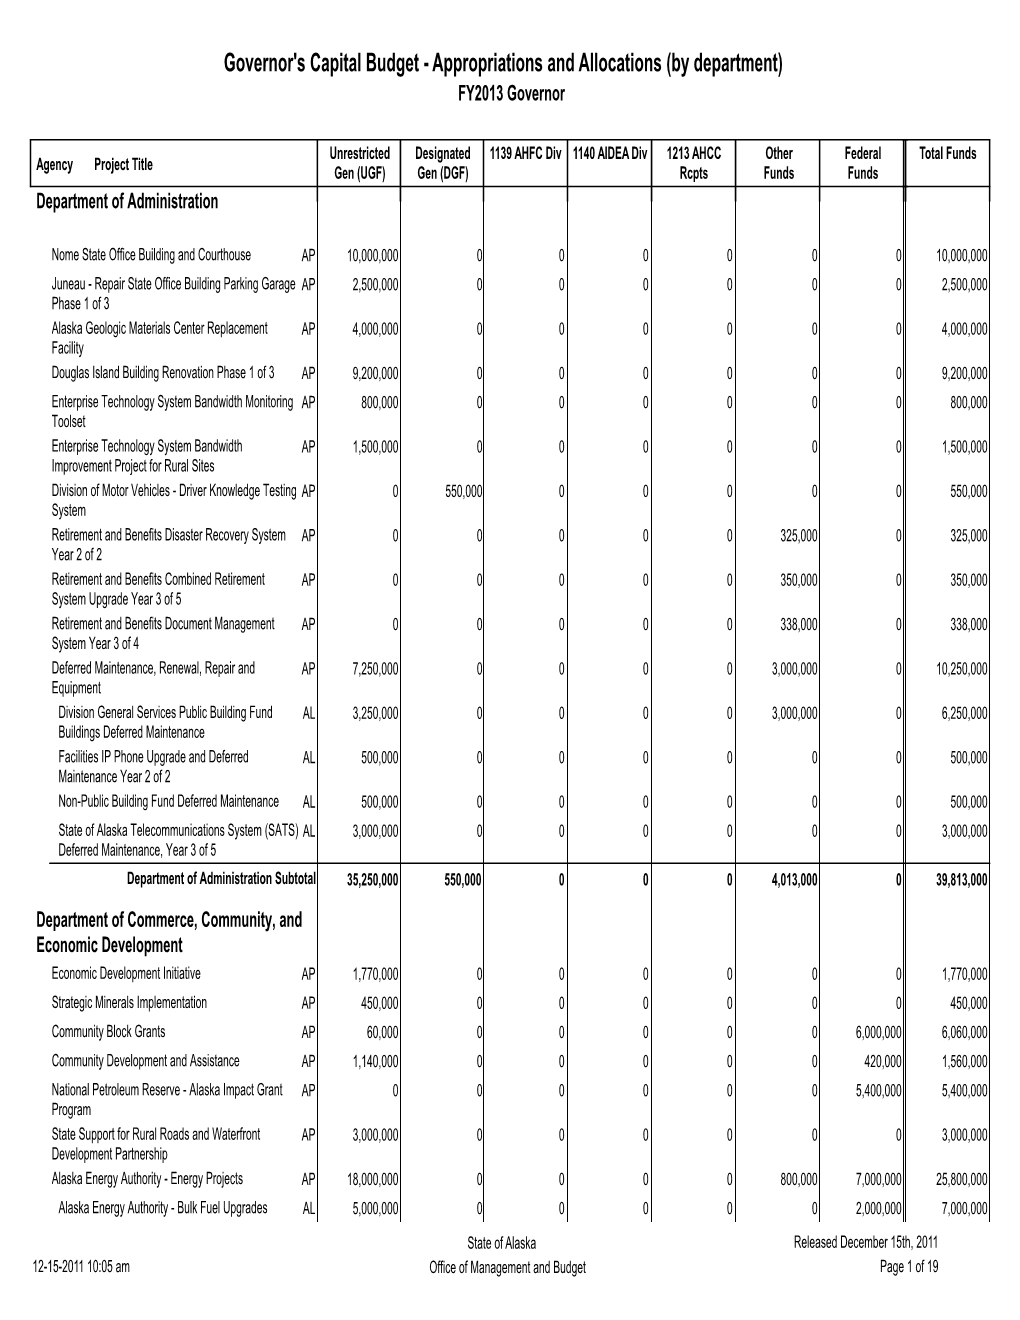 Governor's Capital Budget - Appropriations and Allocations (By Department) FY2013 Governor